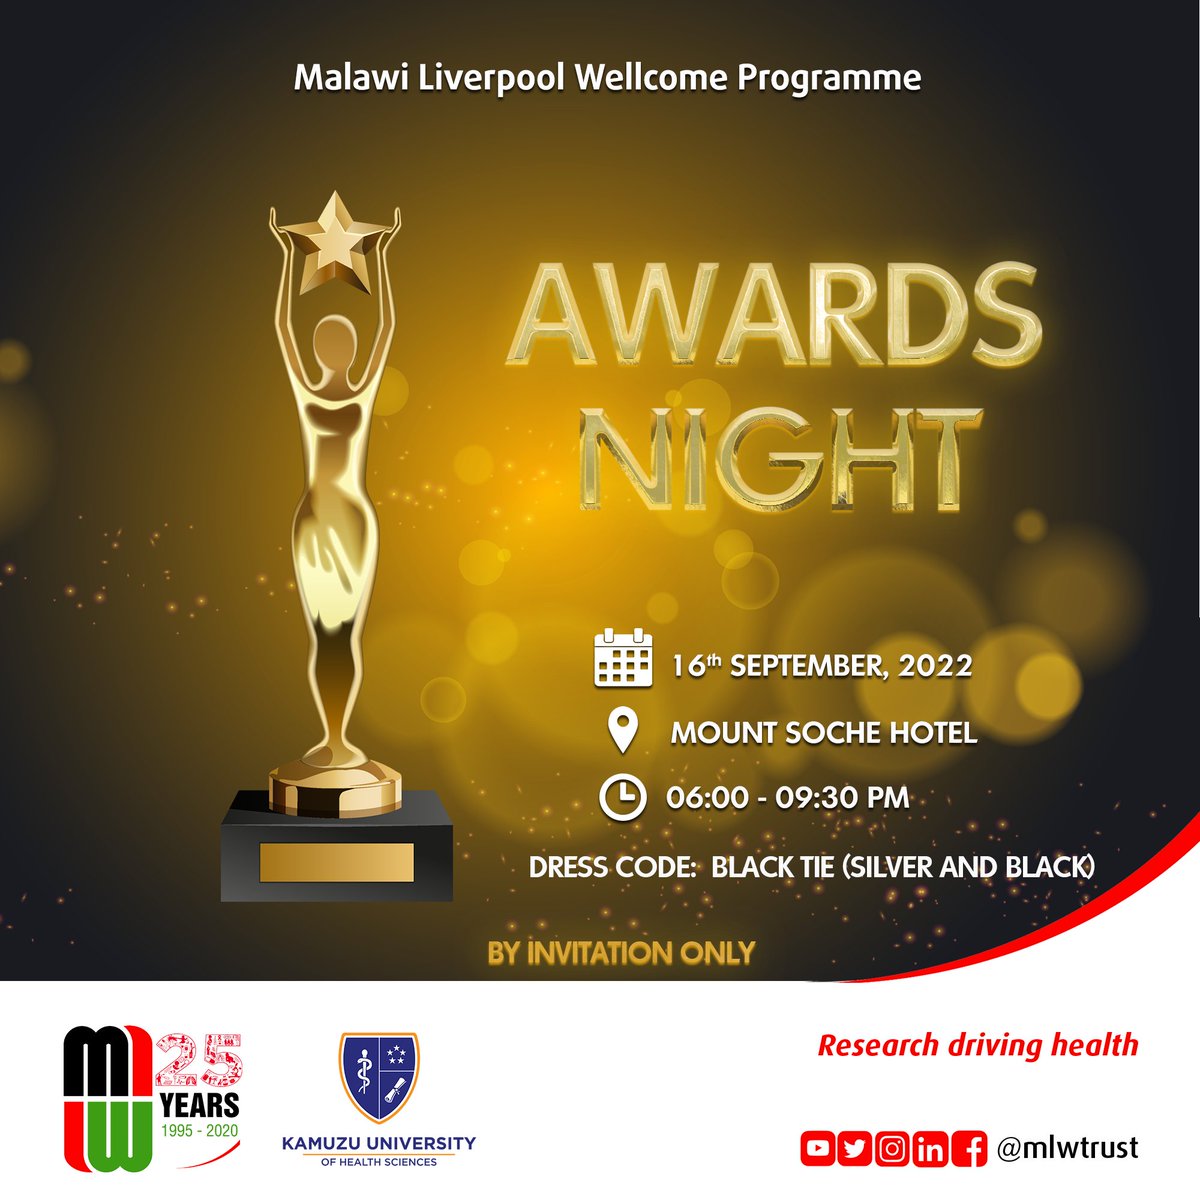 Tonight, we will celebrate our staff, partners & the community with an Awards Night. We cherish the continued relationships that we have built with everyone along the way and we are grateful for the continued strength that these relationships bring.
#Research_driving_health